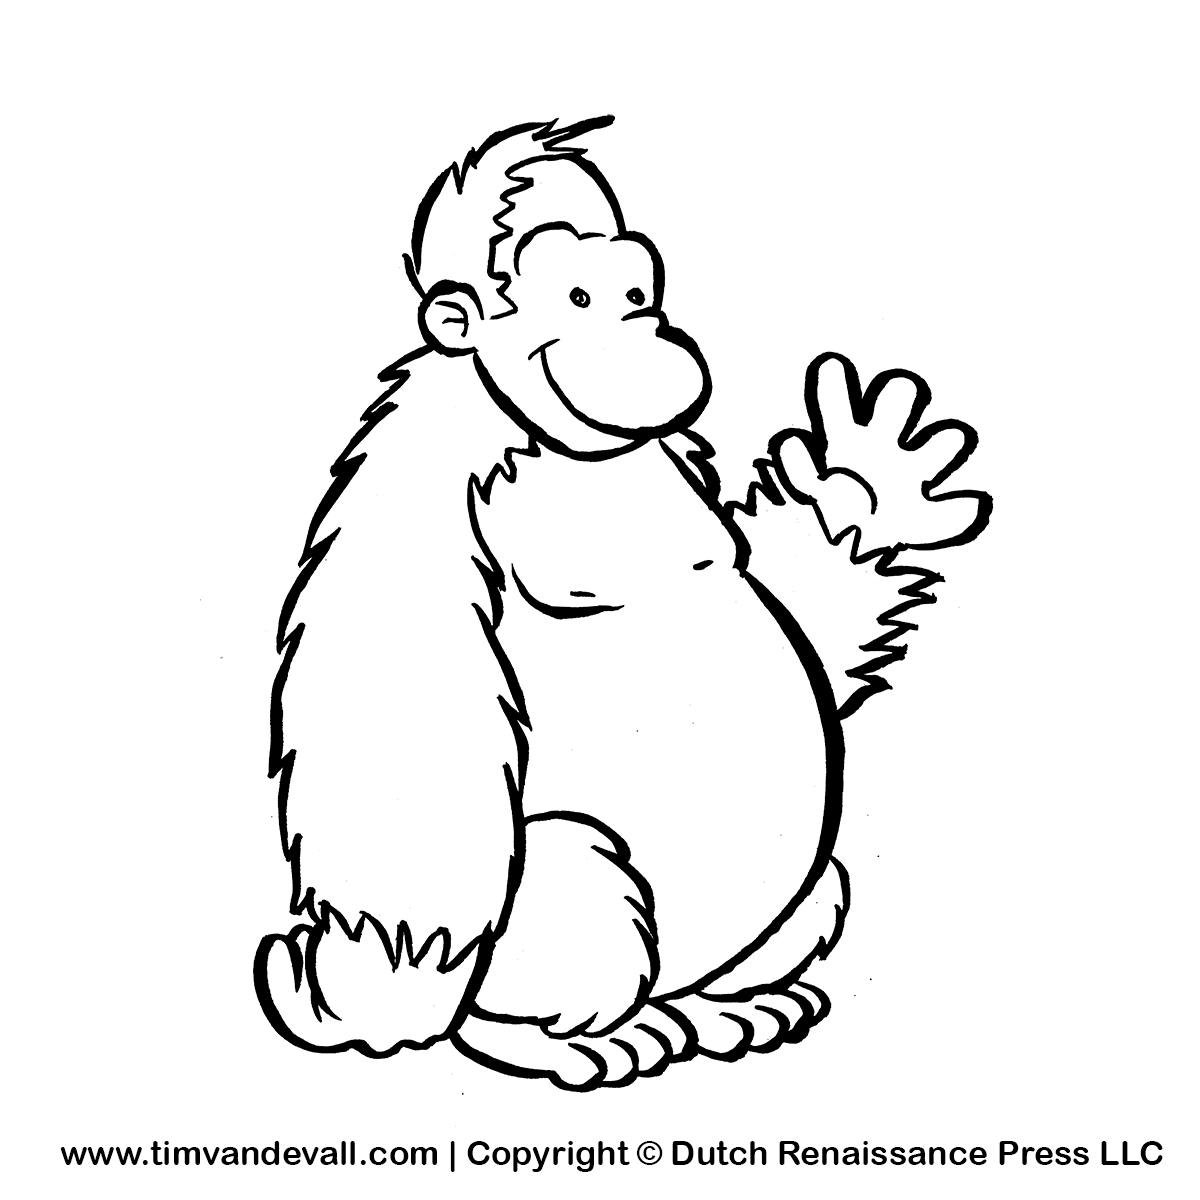 Easy How to Draw a Gorilla Tutorial and Gorilla Coloring Page